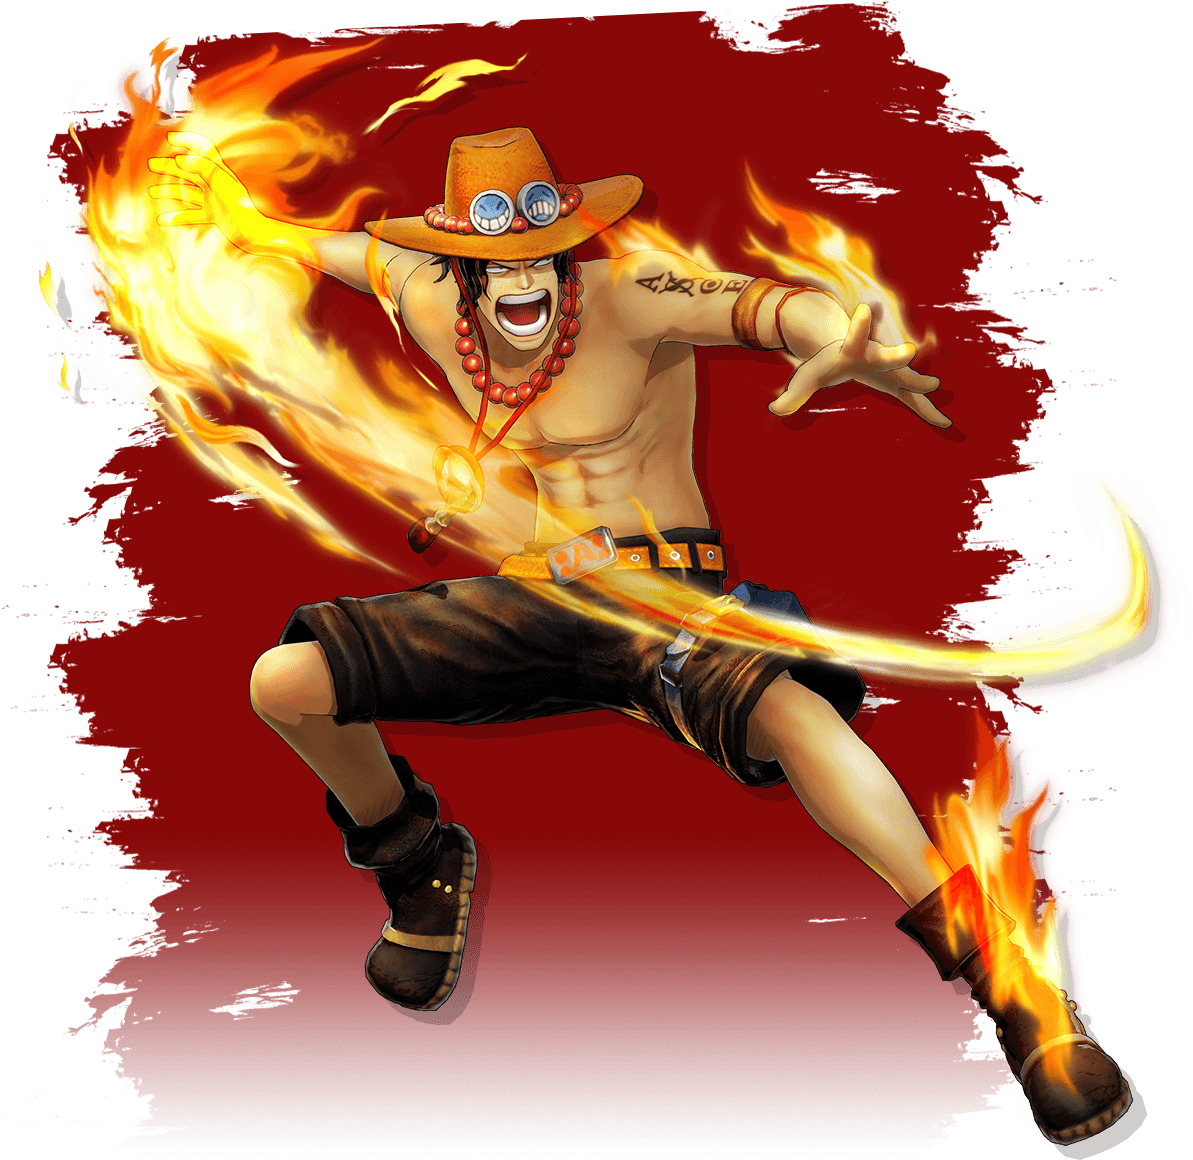 A Cartoon Of A Man In A Hat And Glasses With Flames Coming Out Of His Arms